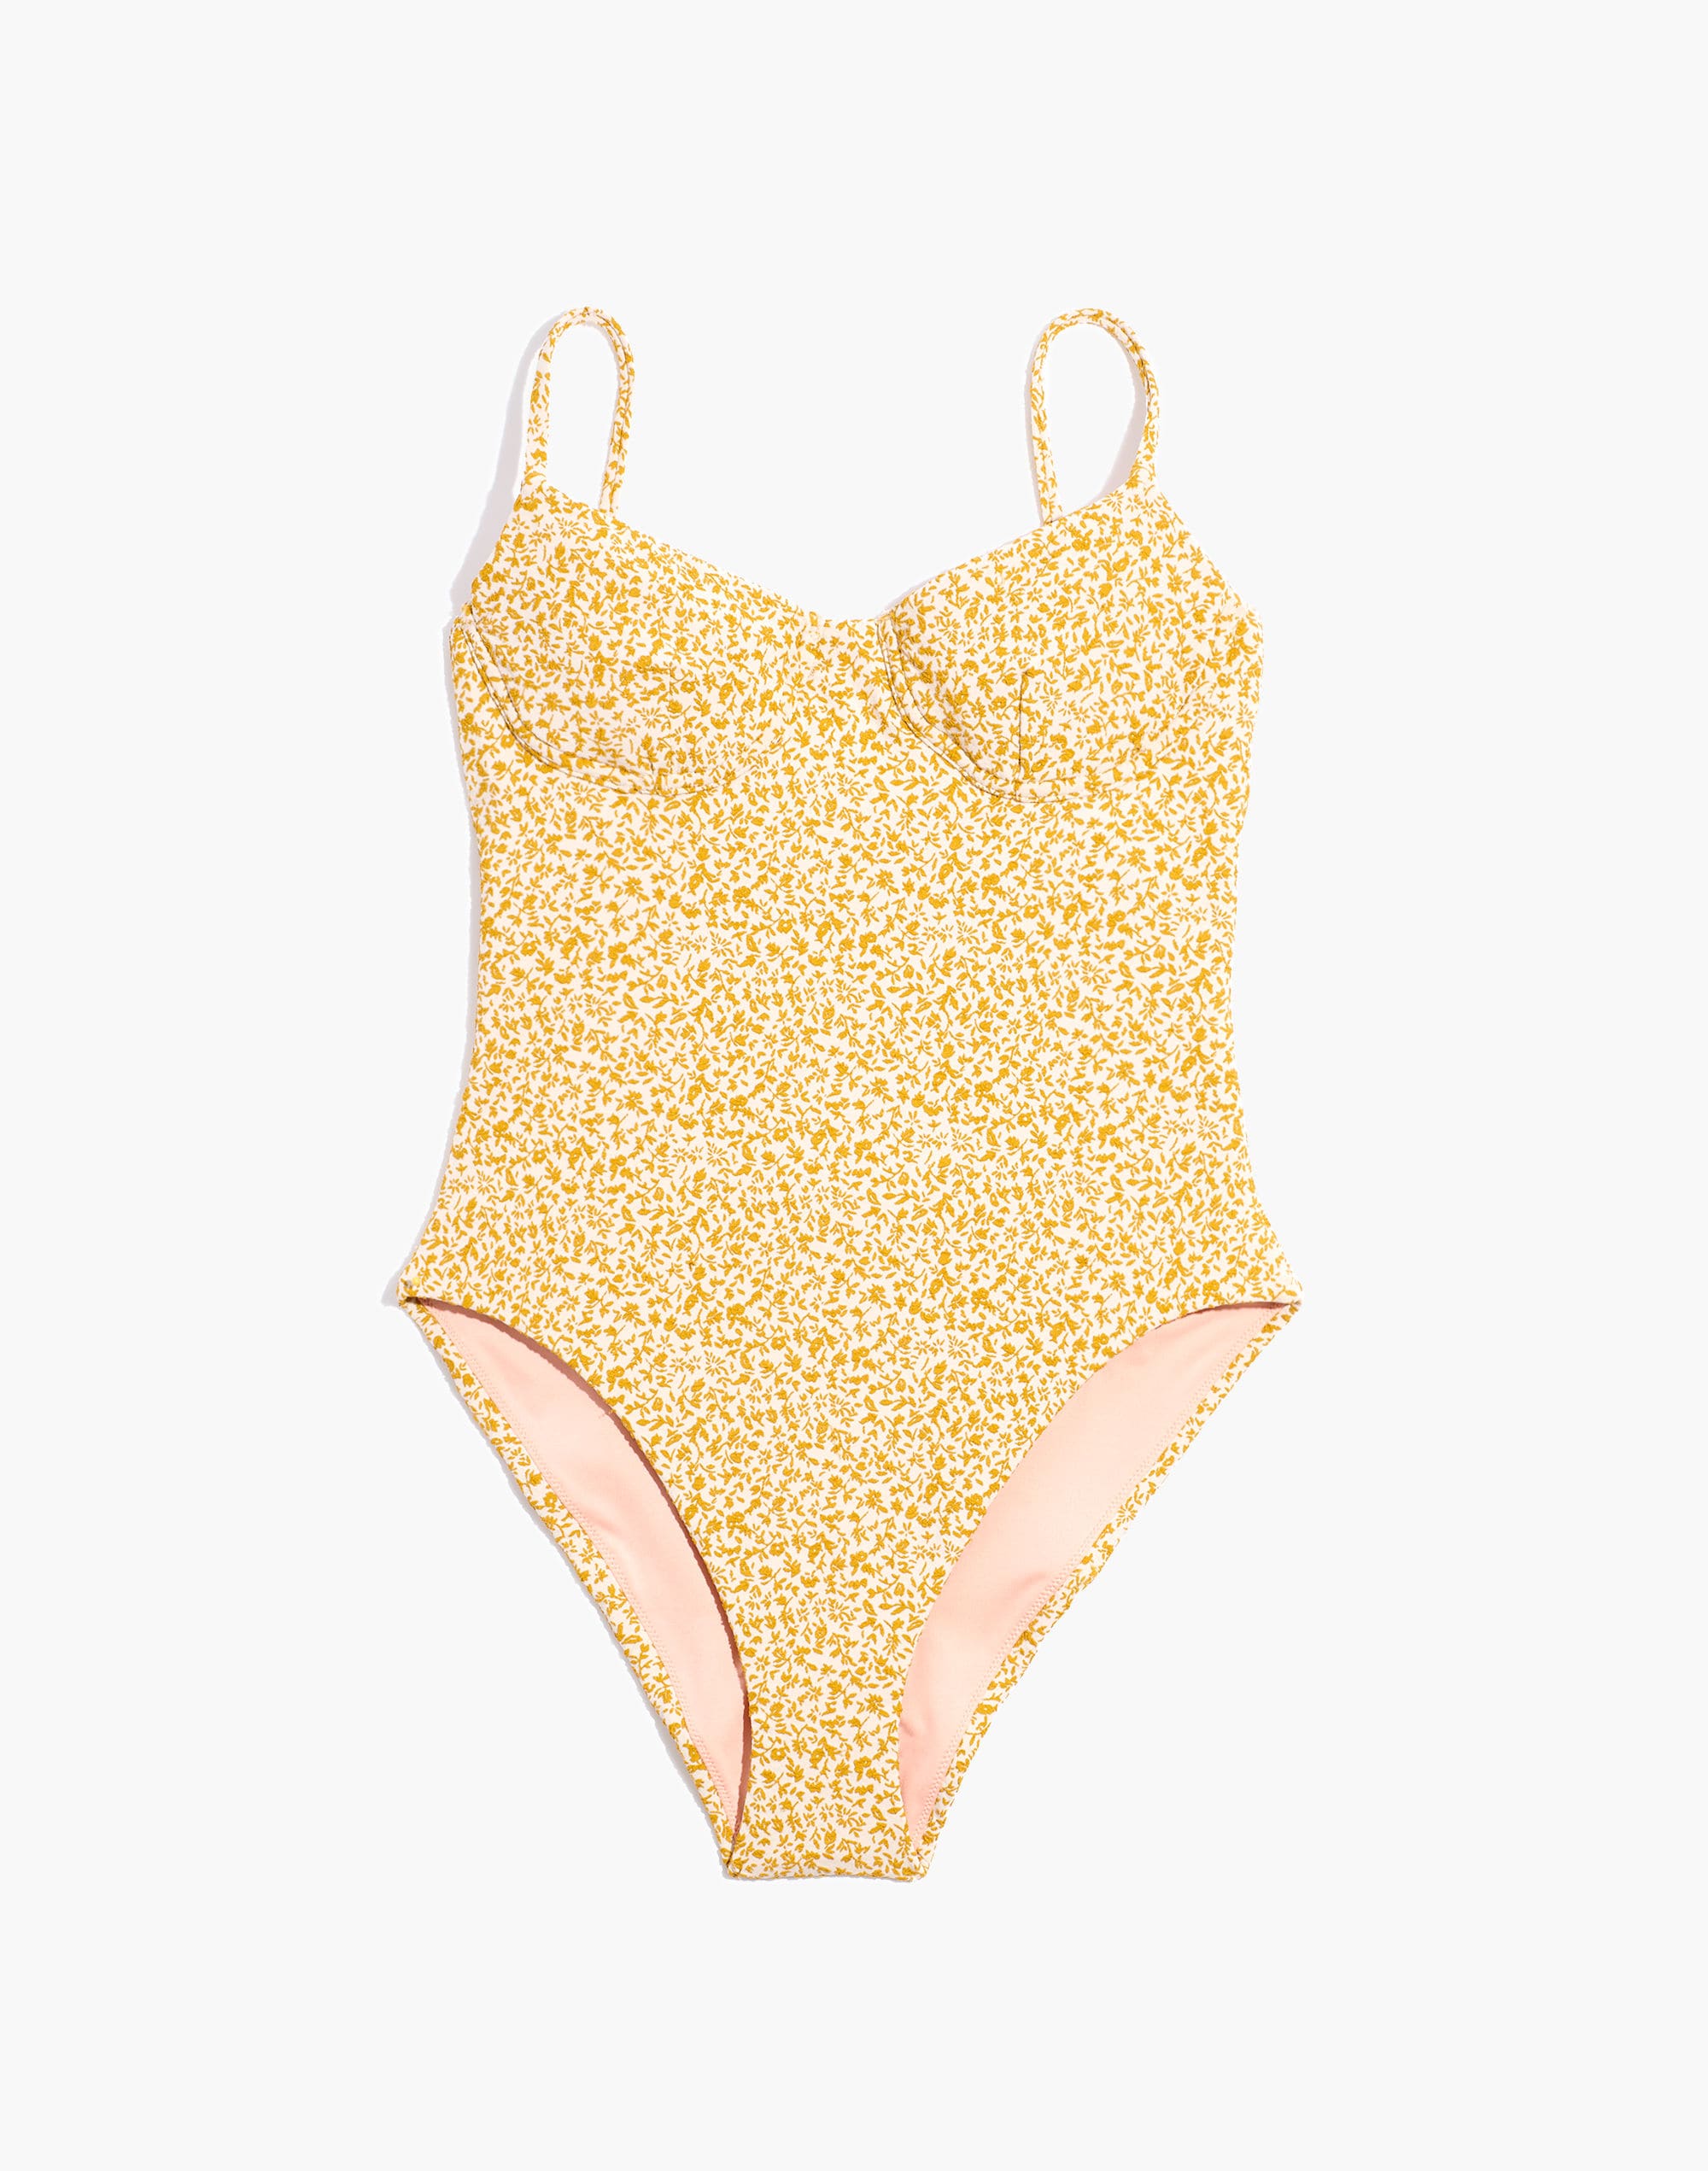 Madewell Second Wave Floral Jacquard Seamed One-Piece Swimsuit